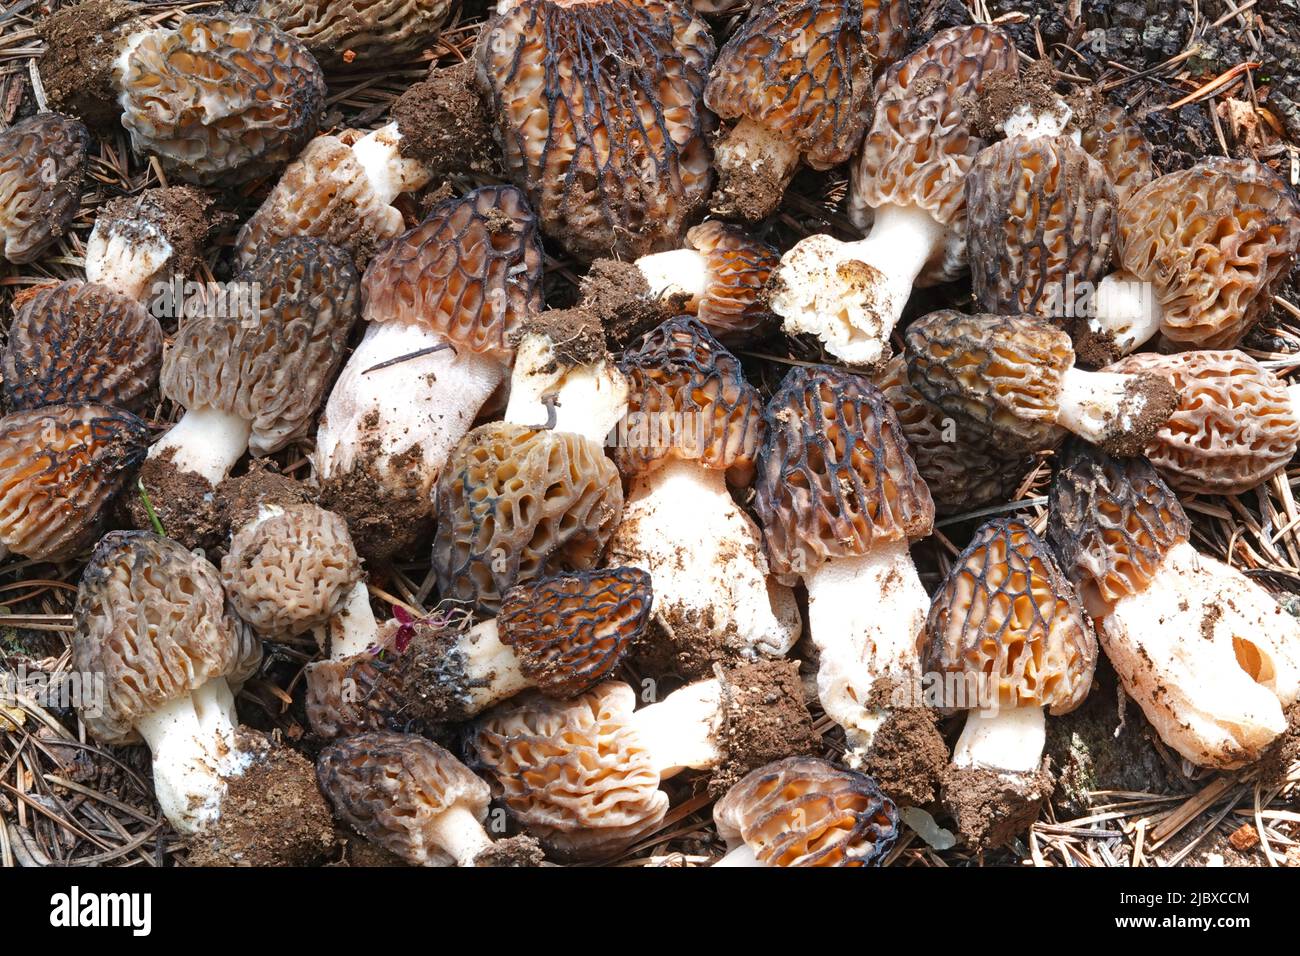 A basket of fresh morel mushrooms, one of the world's most edible gourmet wild mushrooms. Stock Photo